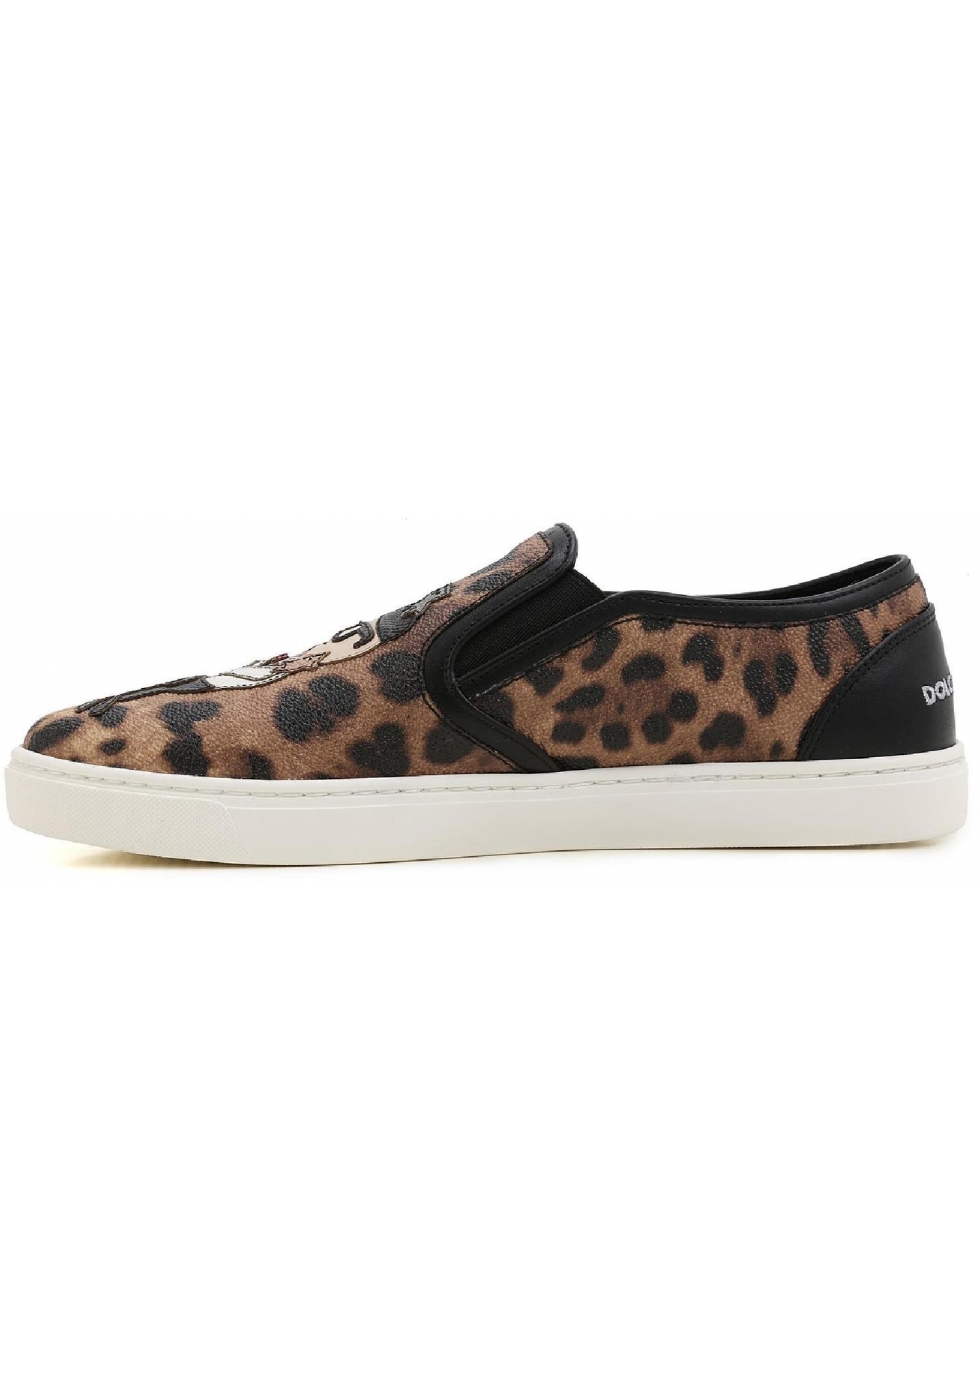 Dolce&Gabbana womens slip-ons in leopard Calf leather - Italian Boutique